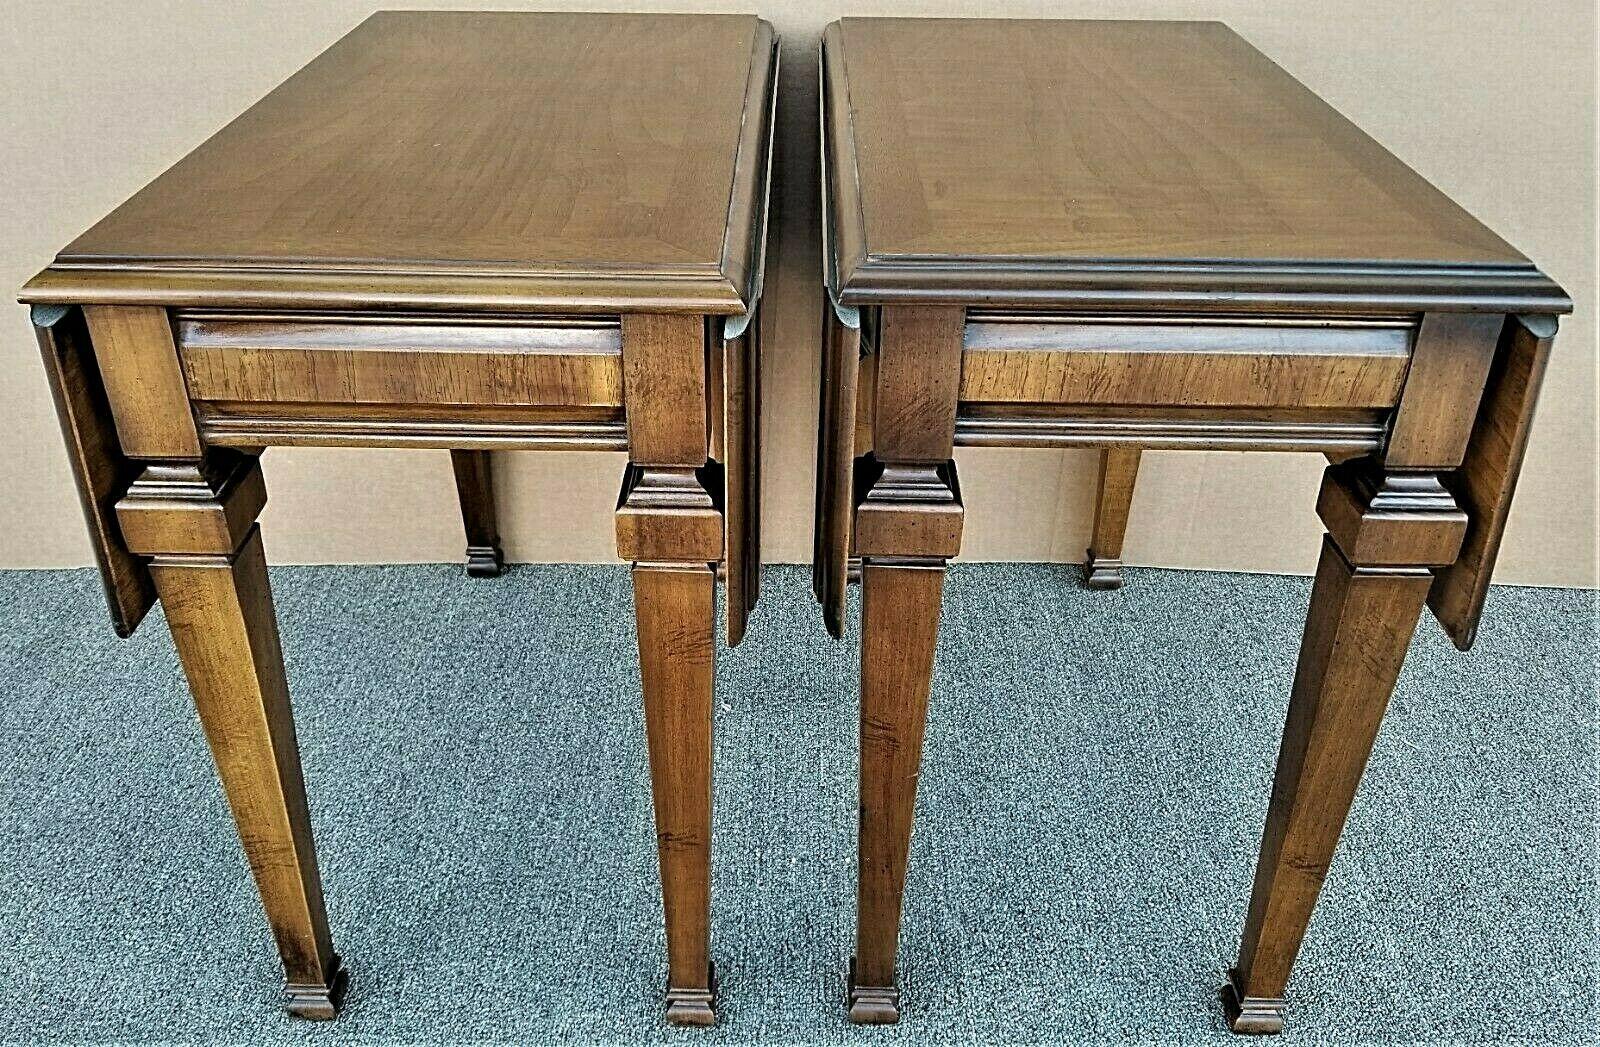 For FULL item description be sure to click on CONTINUE READING at the bottom of this listing.

Offering One Of Our Recent Palm Beach Estate Fine Furniture Acquisitions Of A
Pair of Lane Drop-Leaf Traditional Italian Provincial Solid Wood End Side